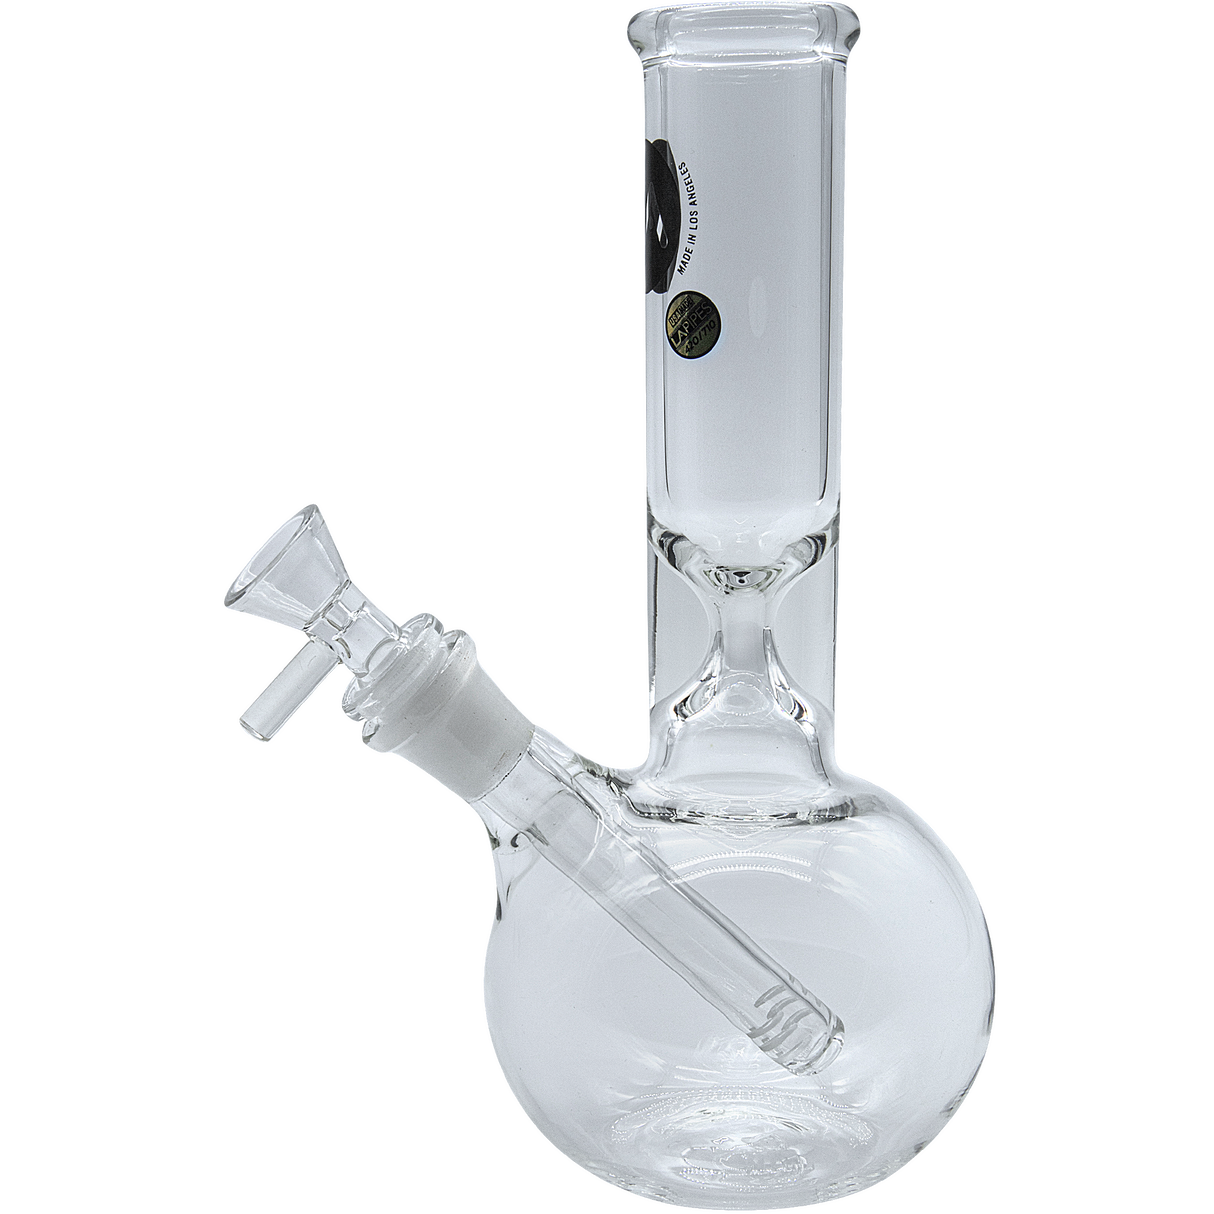 LA Pipes "Baller" Bubble Base Bong with Clear Borosilicate Glass - Front View